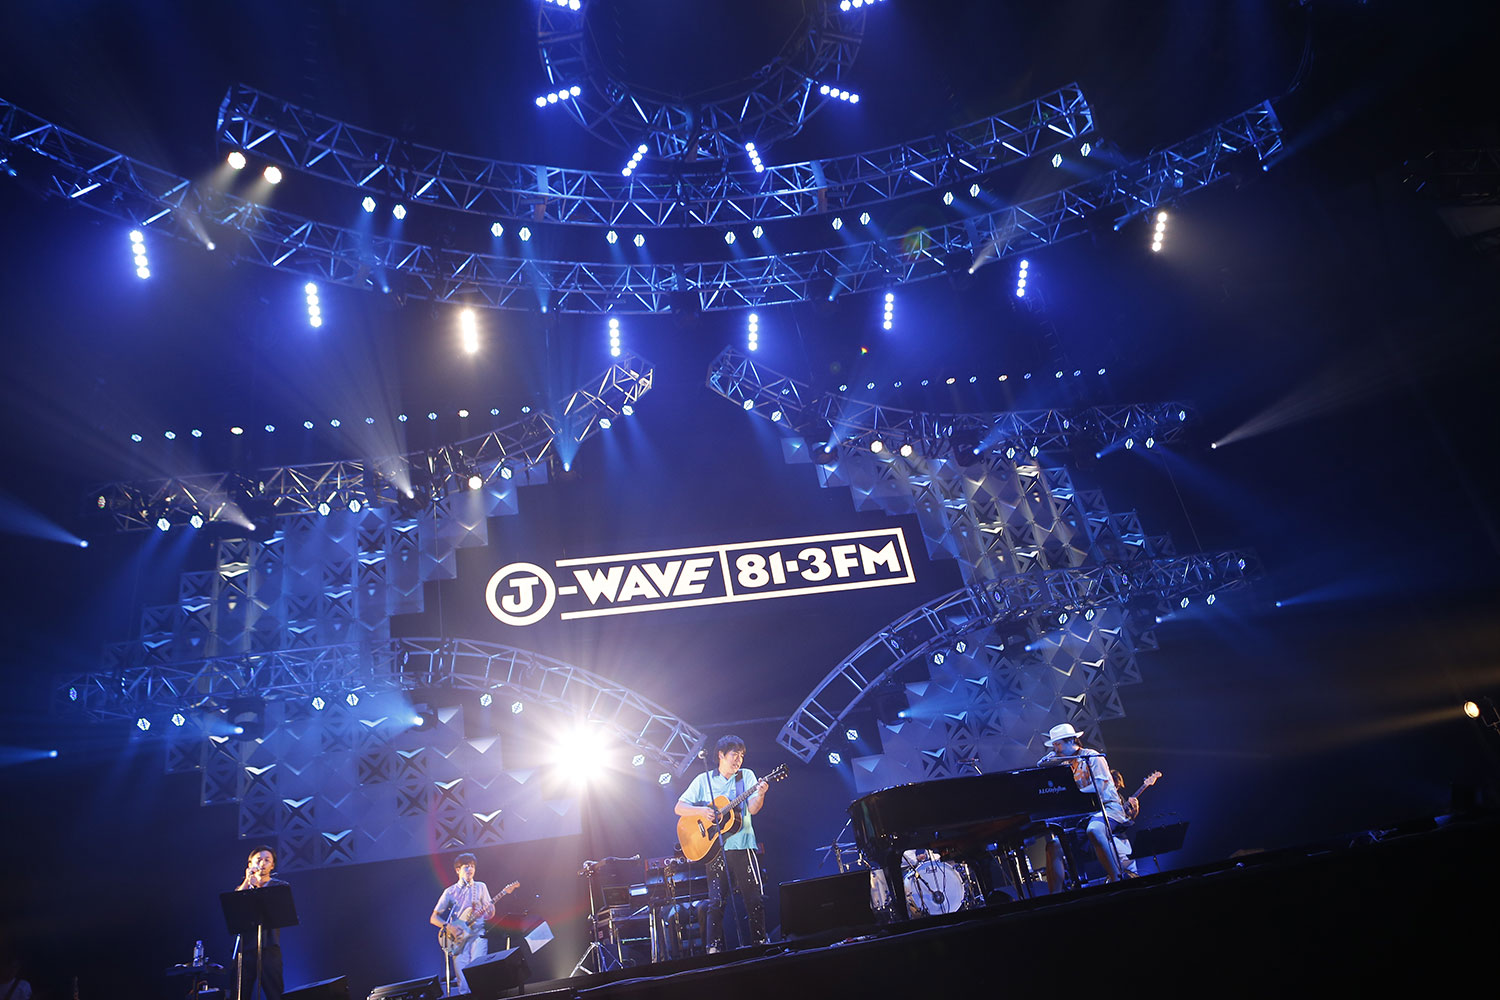 「J-WAVE LIVE SUMMER JAM 2018 supported by antenna*」のスキマスイッチ